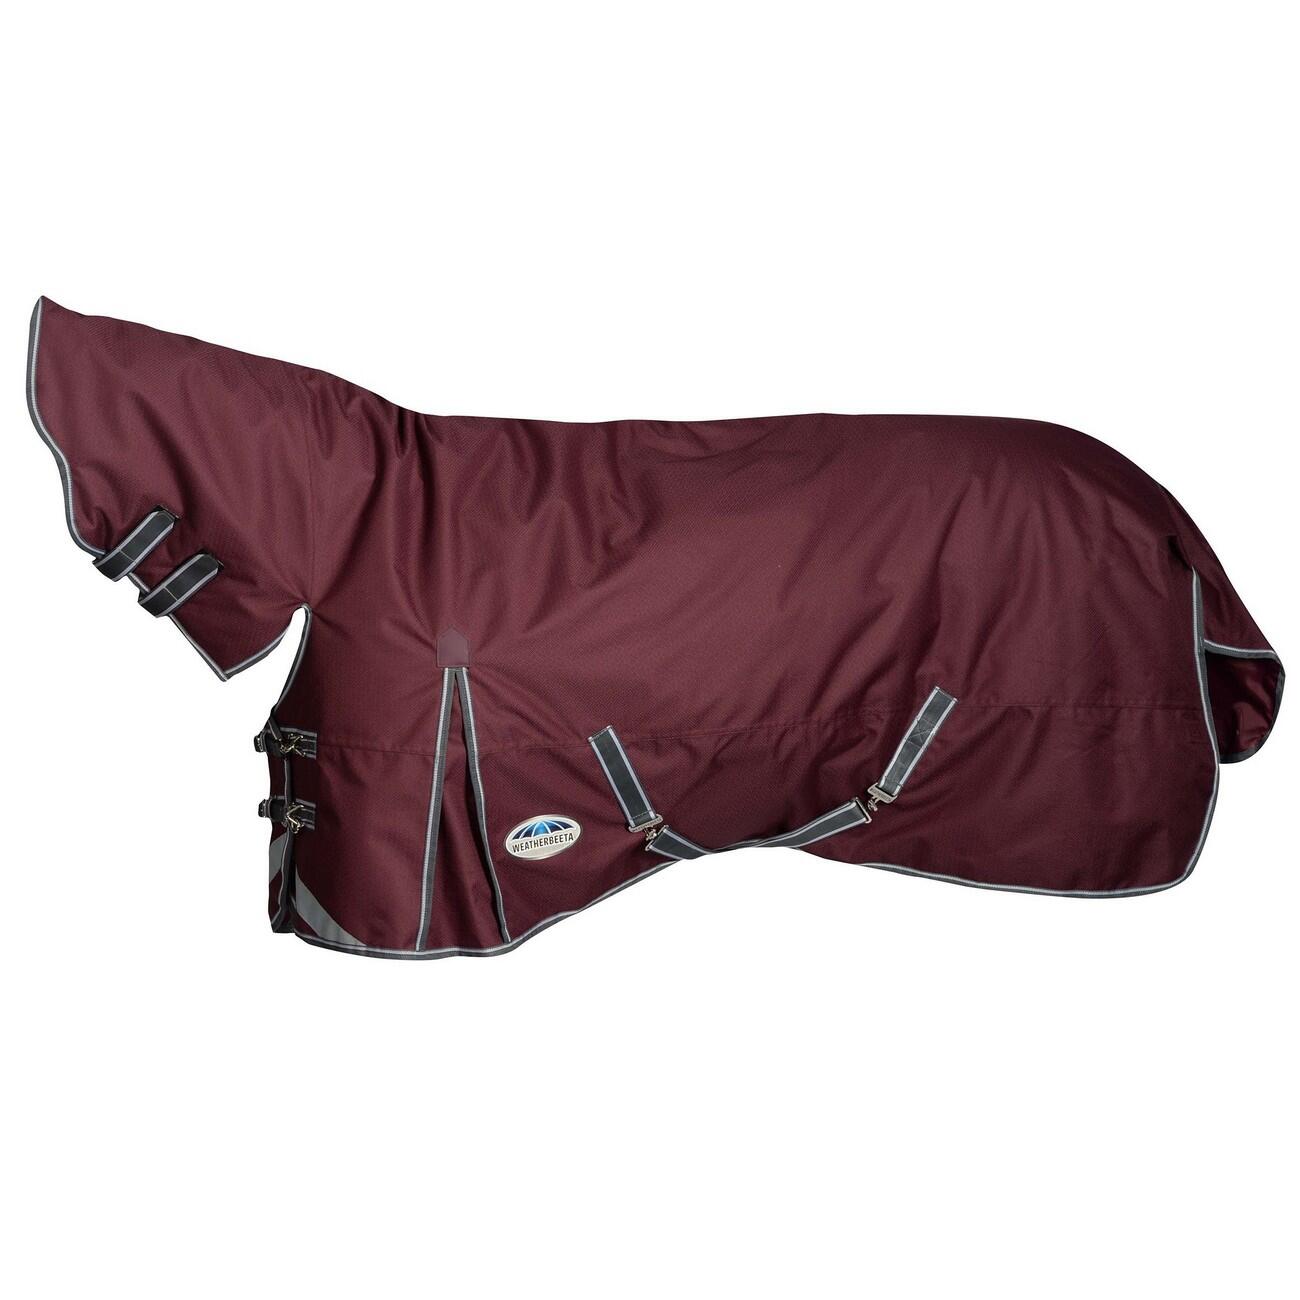 Comfitec Plus Dynamic II Combo Neck Midweight Horse Turnout Rug 1/4